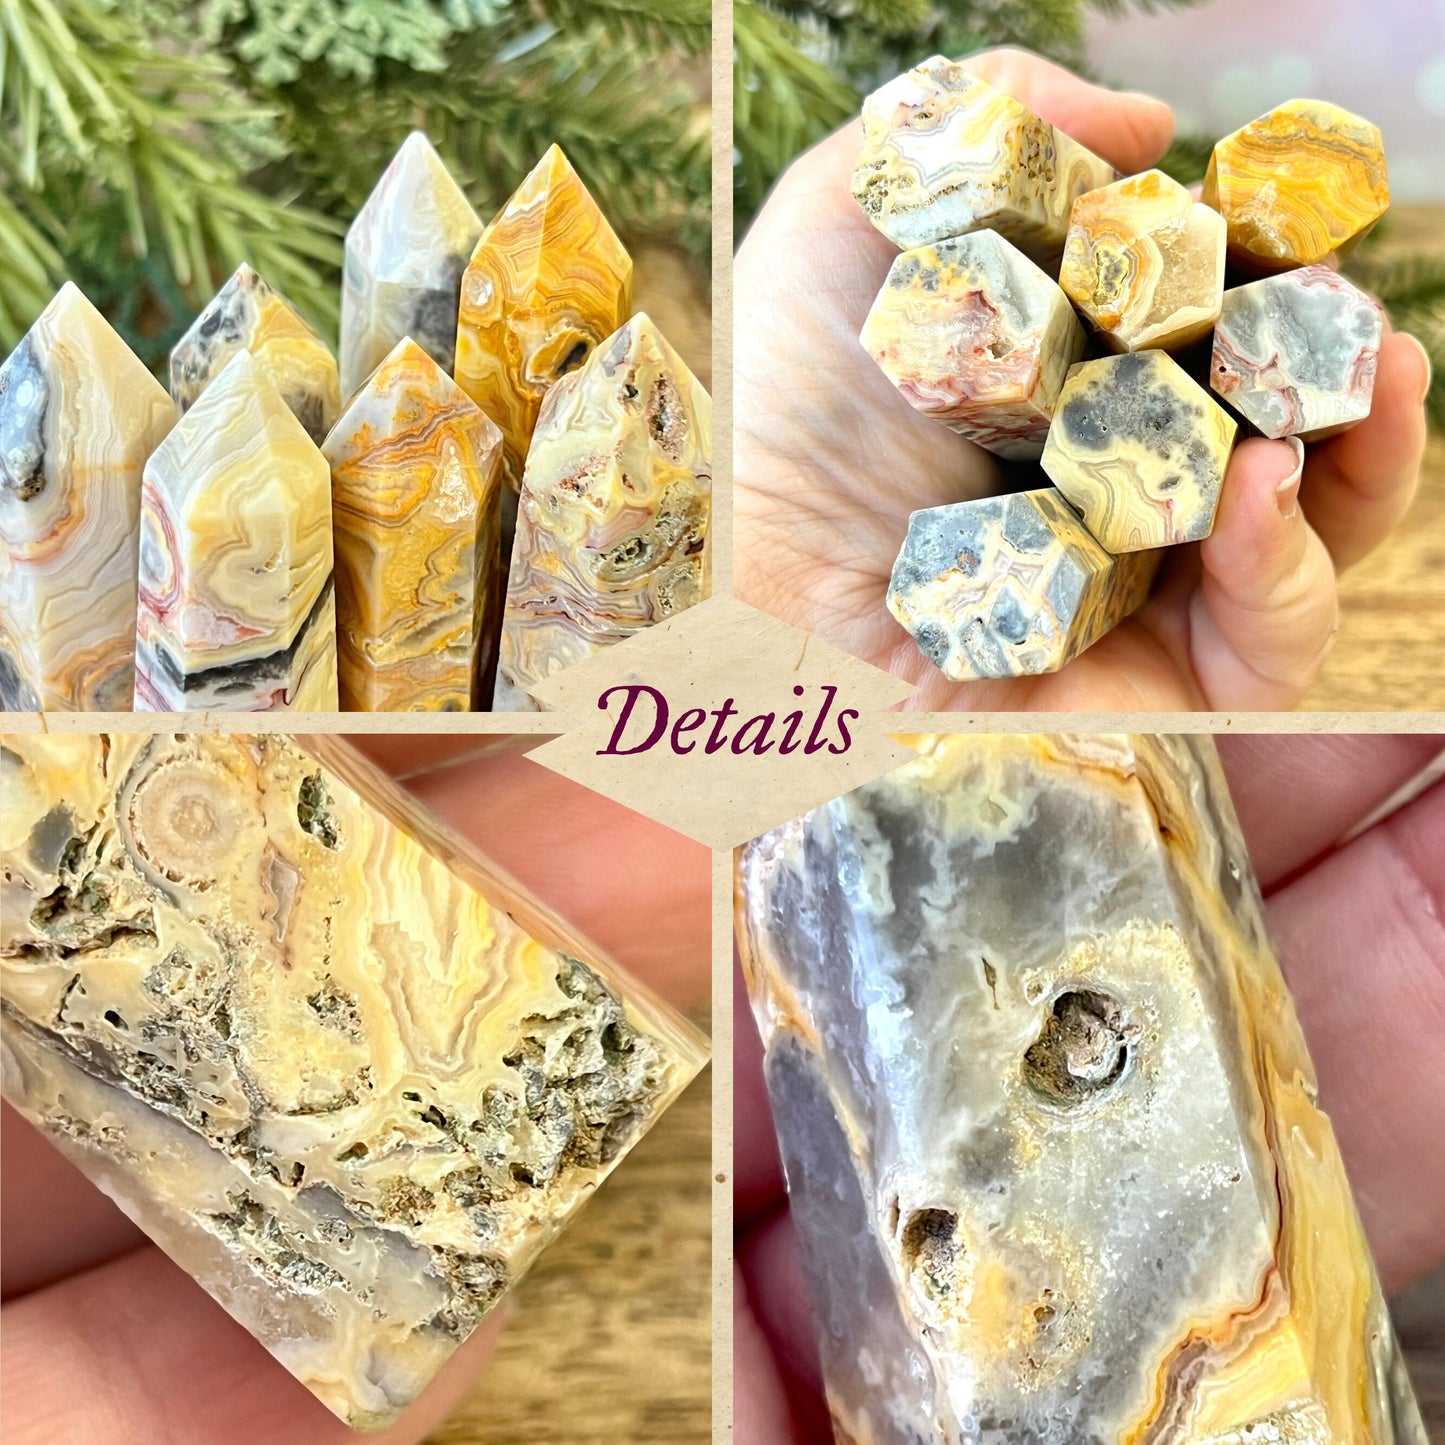 Crazy Lace Agate Crystal Tower - You get one